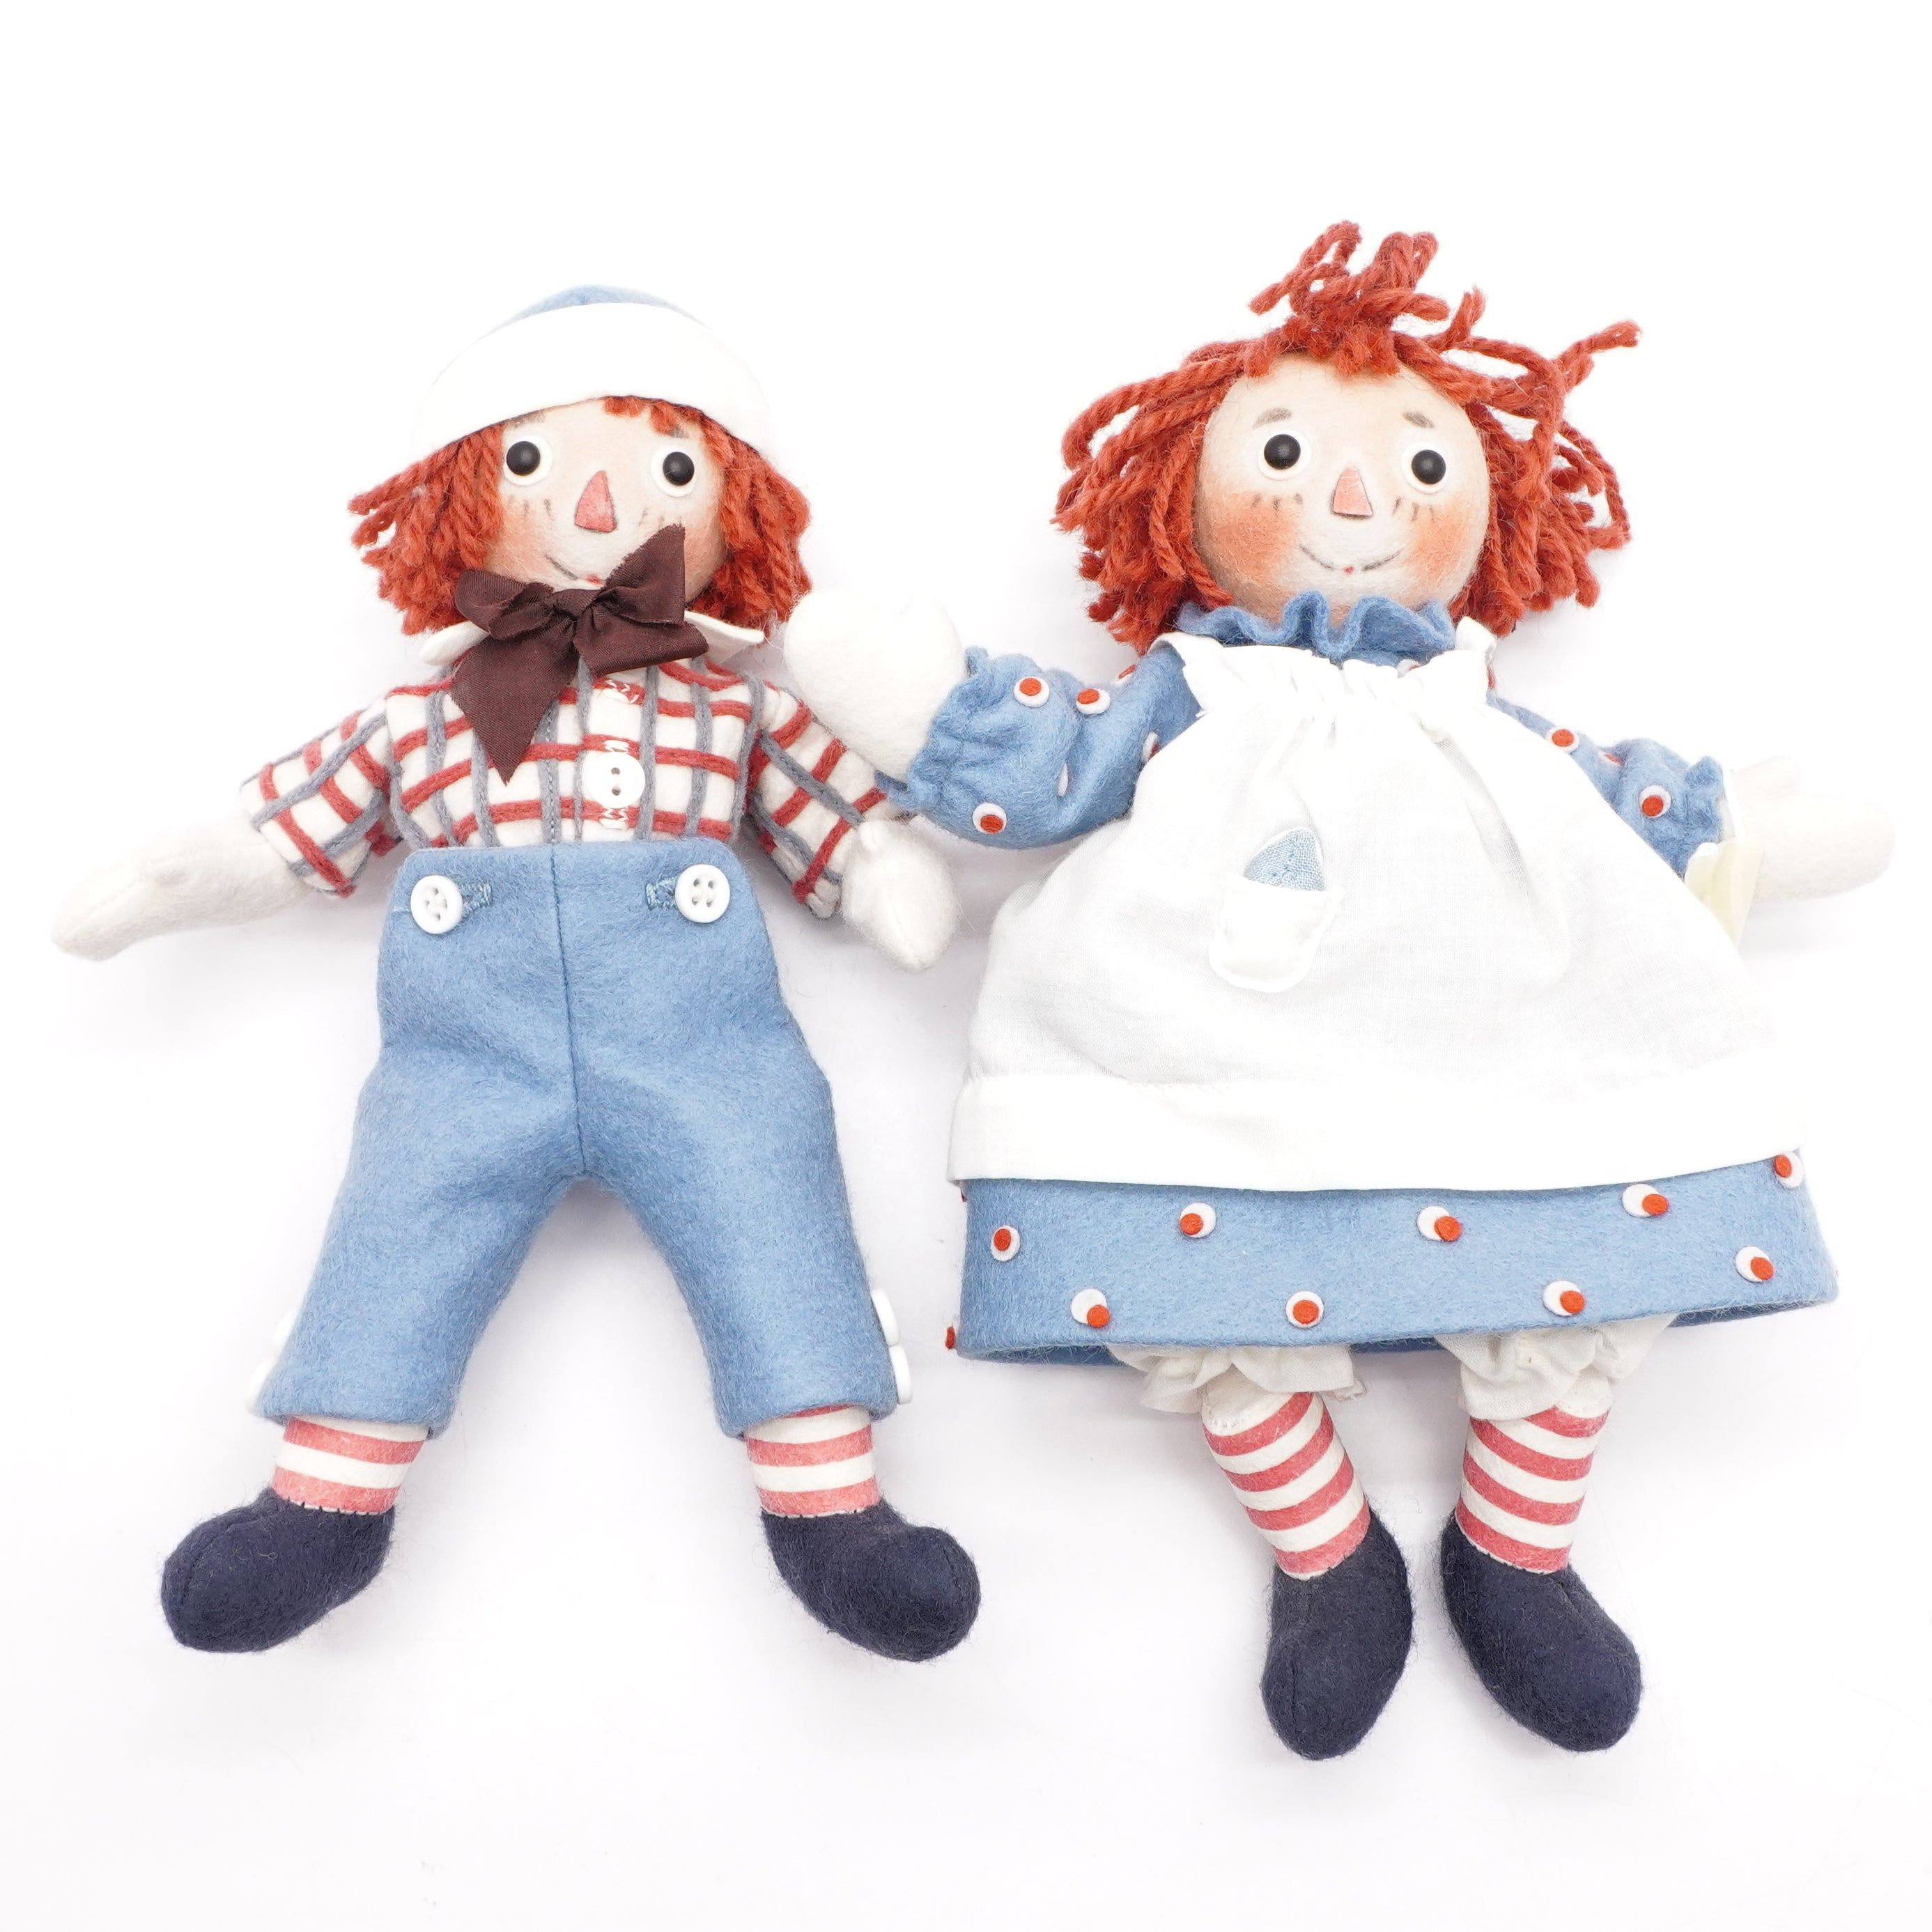 Limited Edition Raggedy Ann and Raggedy Andy